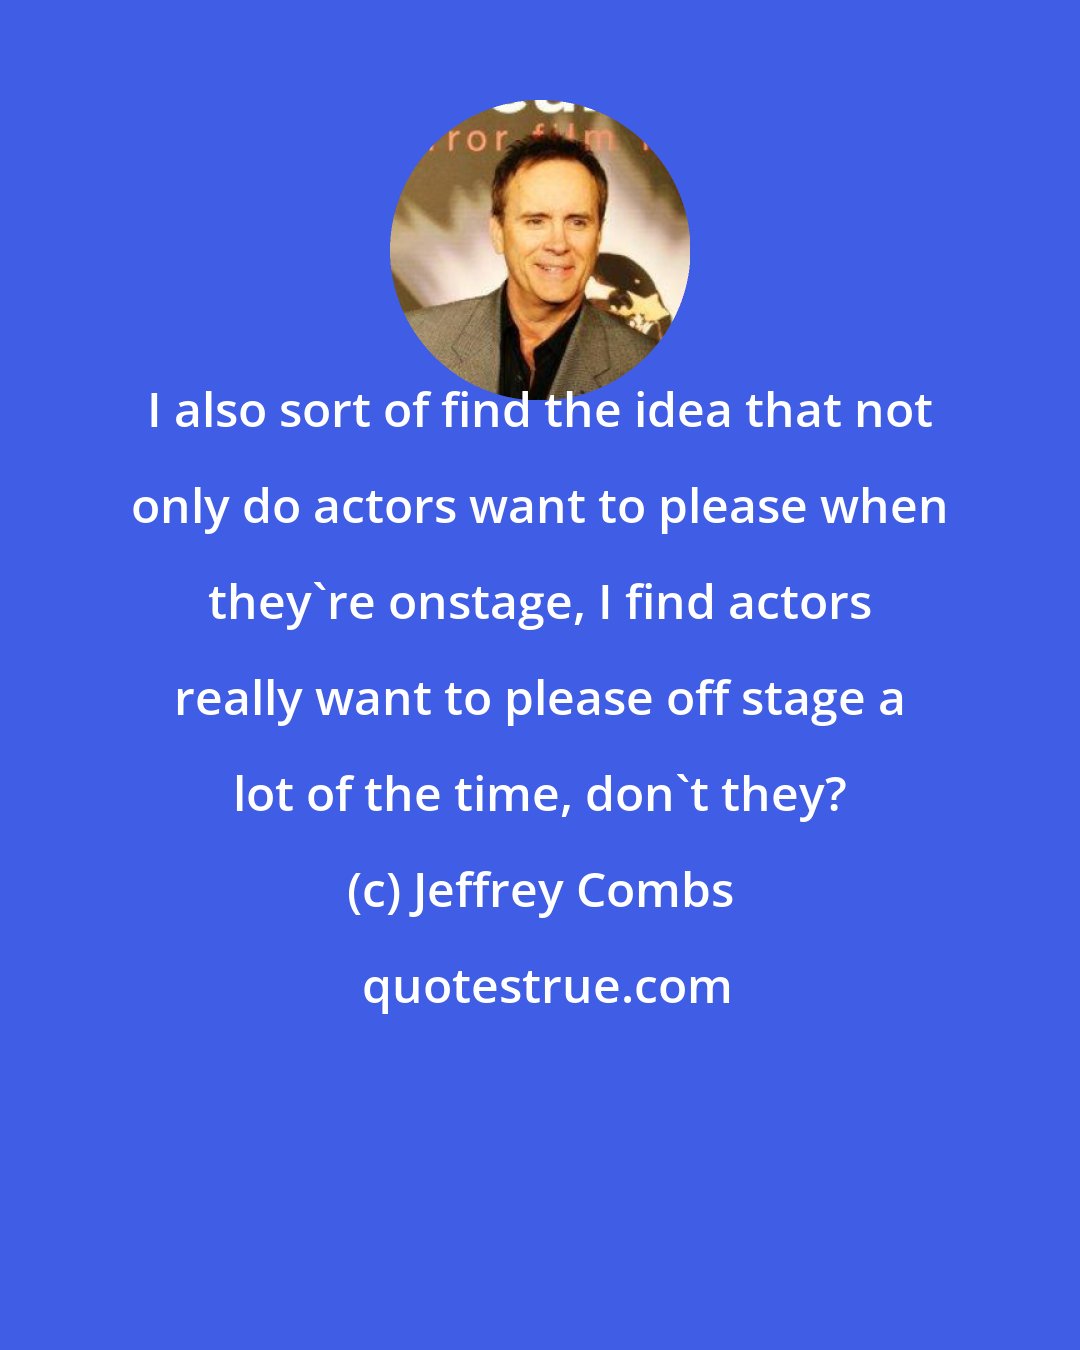 Jeffrey Combs: I also sort of find the idea that not only do actors want to please when they're onstage, I find actors really want to please off stage a lot of the time, don't they?